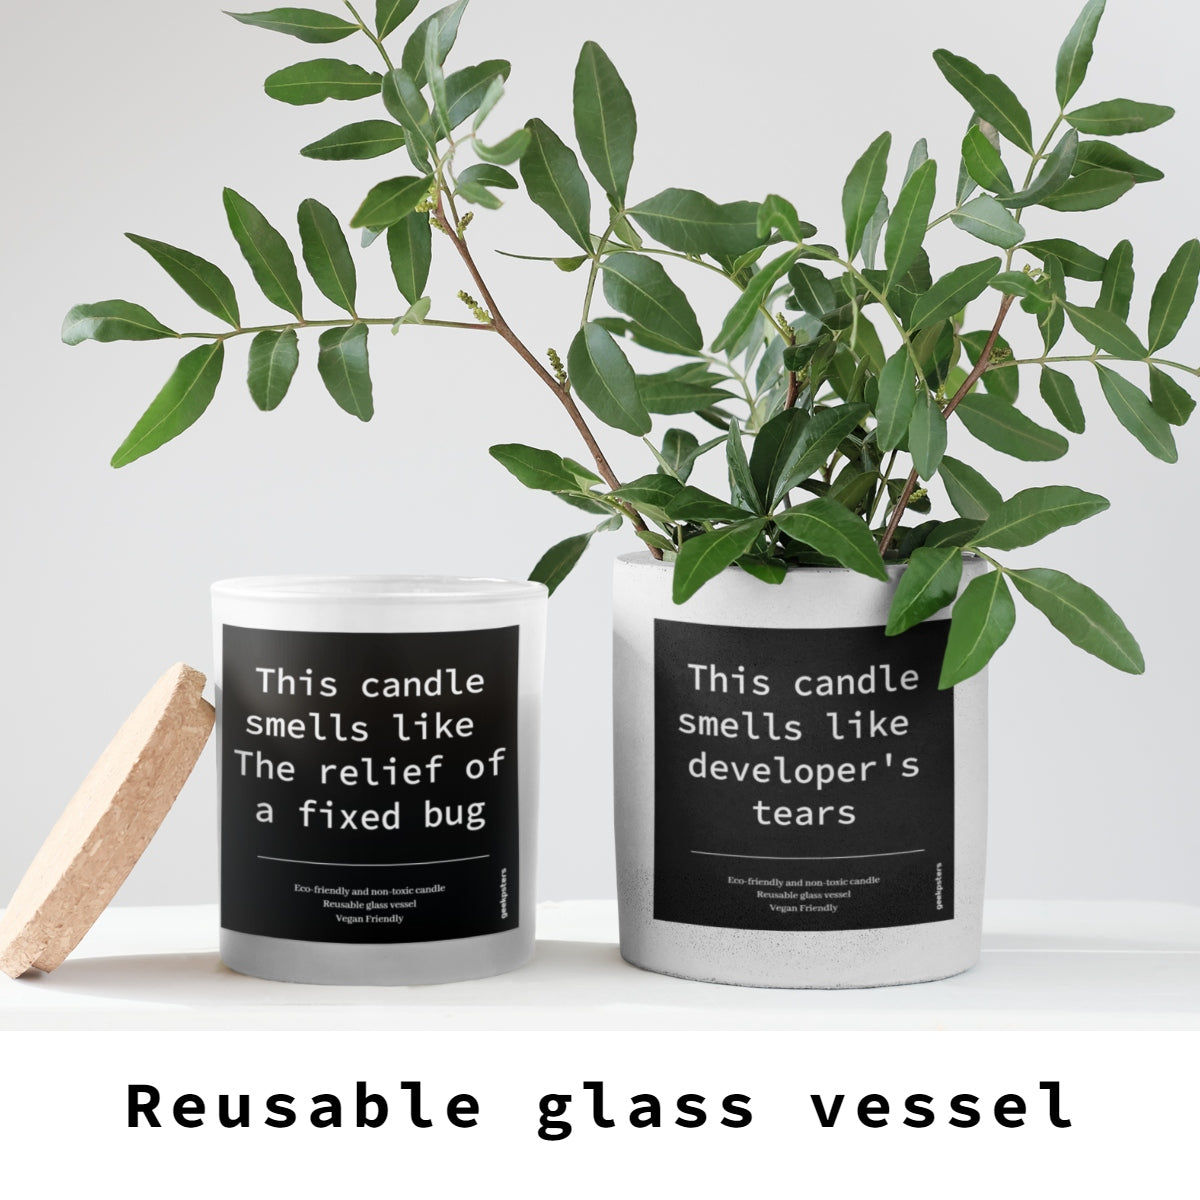 Two Caution May Cause Urge to Deploy scented soy candles in reusable glass vessels with humorous labels, next to a branch with green leaves, against a gray background.